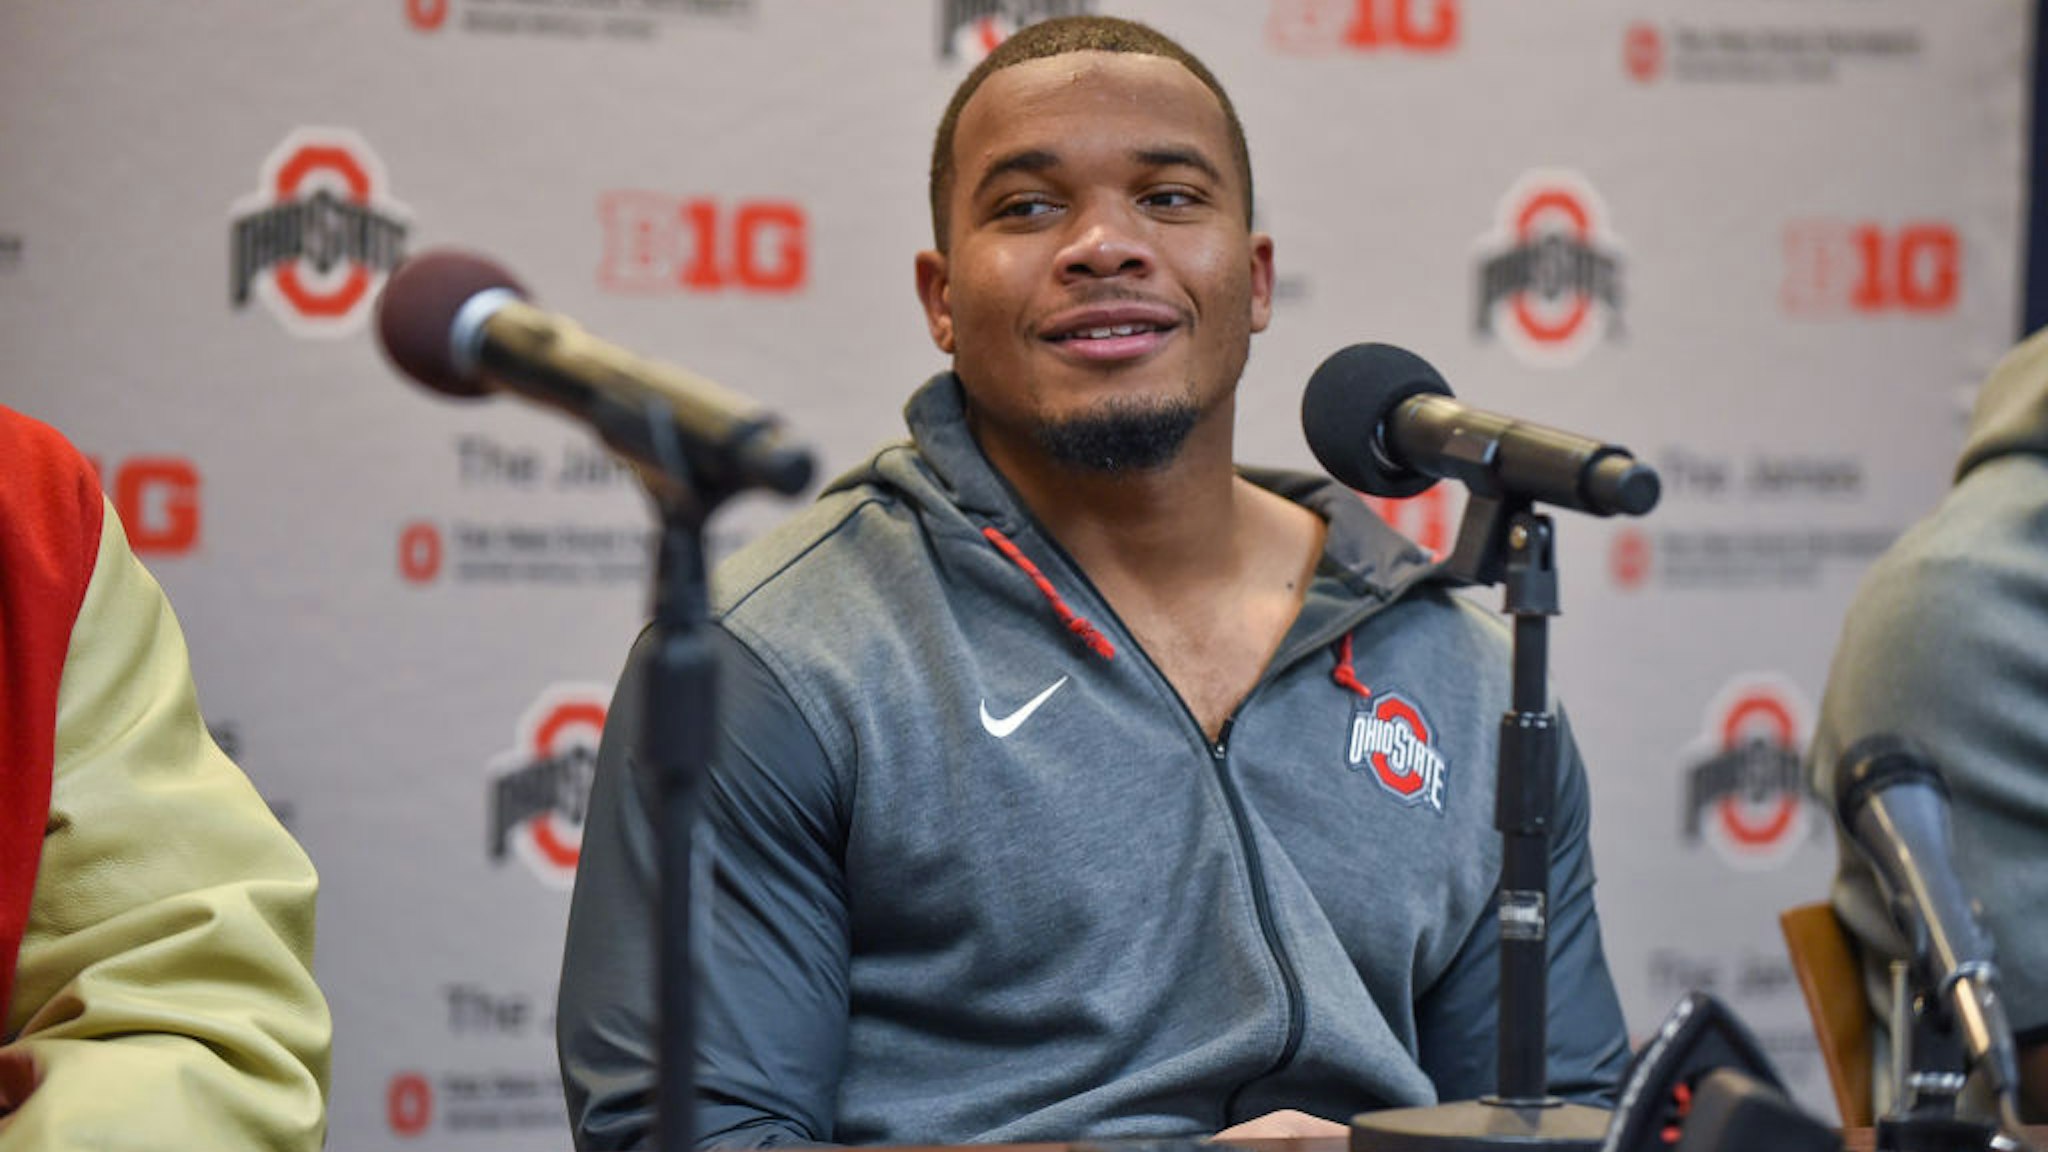 Running Back J.K. Dobbins #2 of the Ohio State Buckeyes speaks during the post game press conference after a college football game against the Michigan Wolverines at Michigan Stadium on November 30, 2019 in Ann Arbor, Michigan.